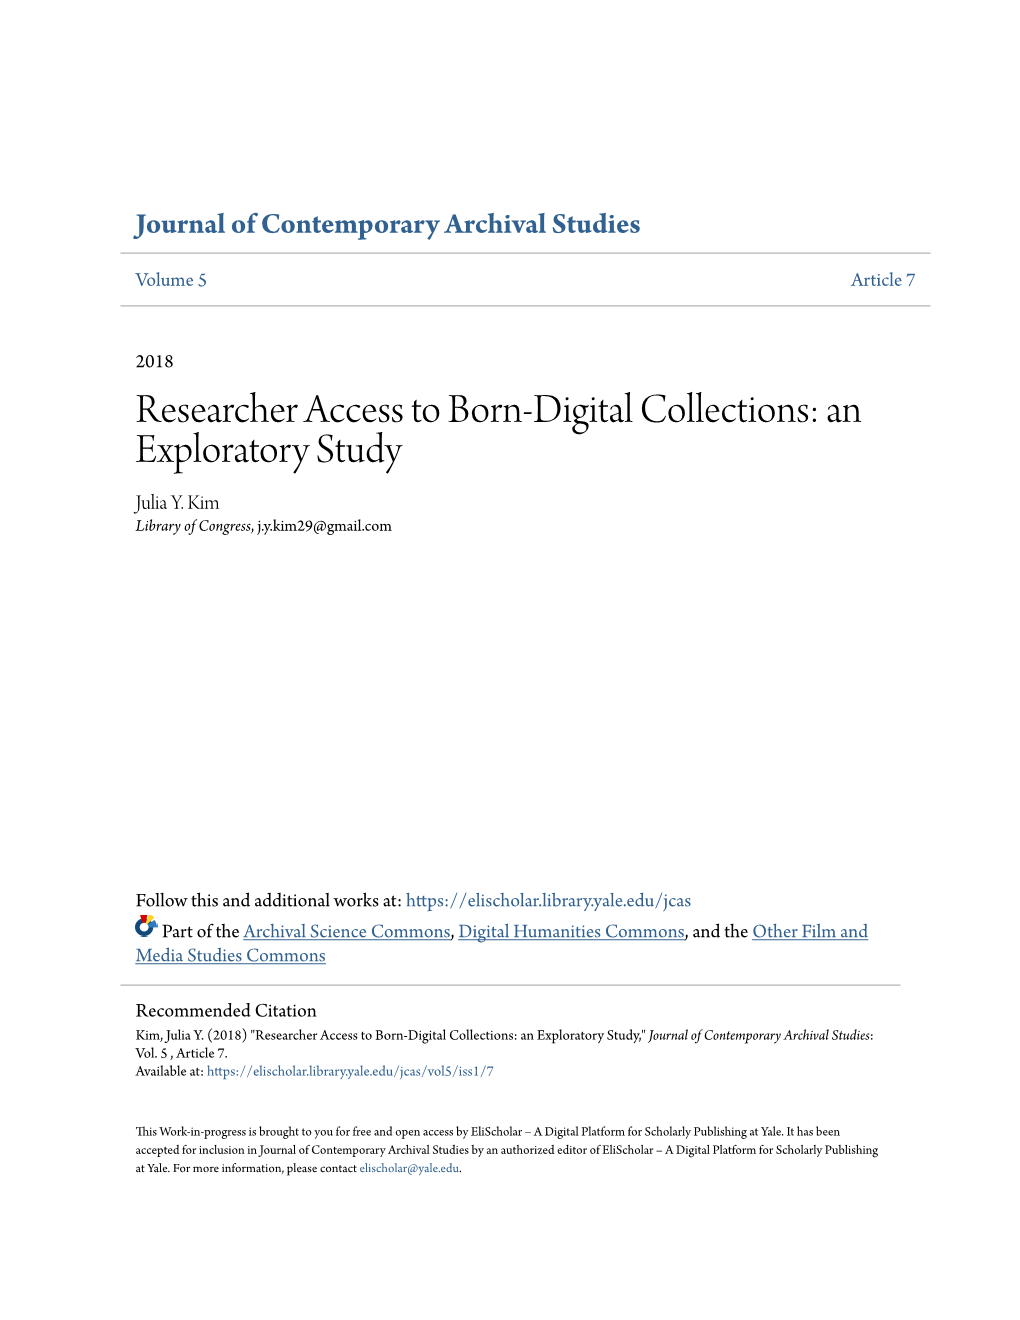 Researcher Access to Born-Digital Collections: an Exploratory Study Julia Y